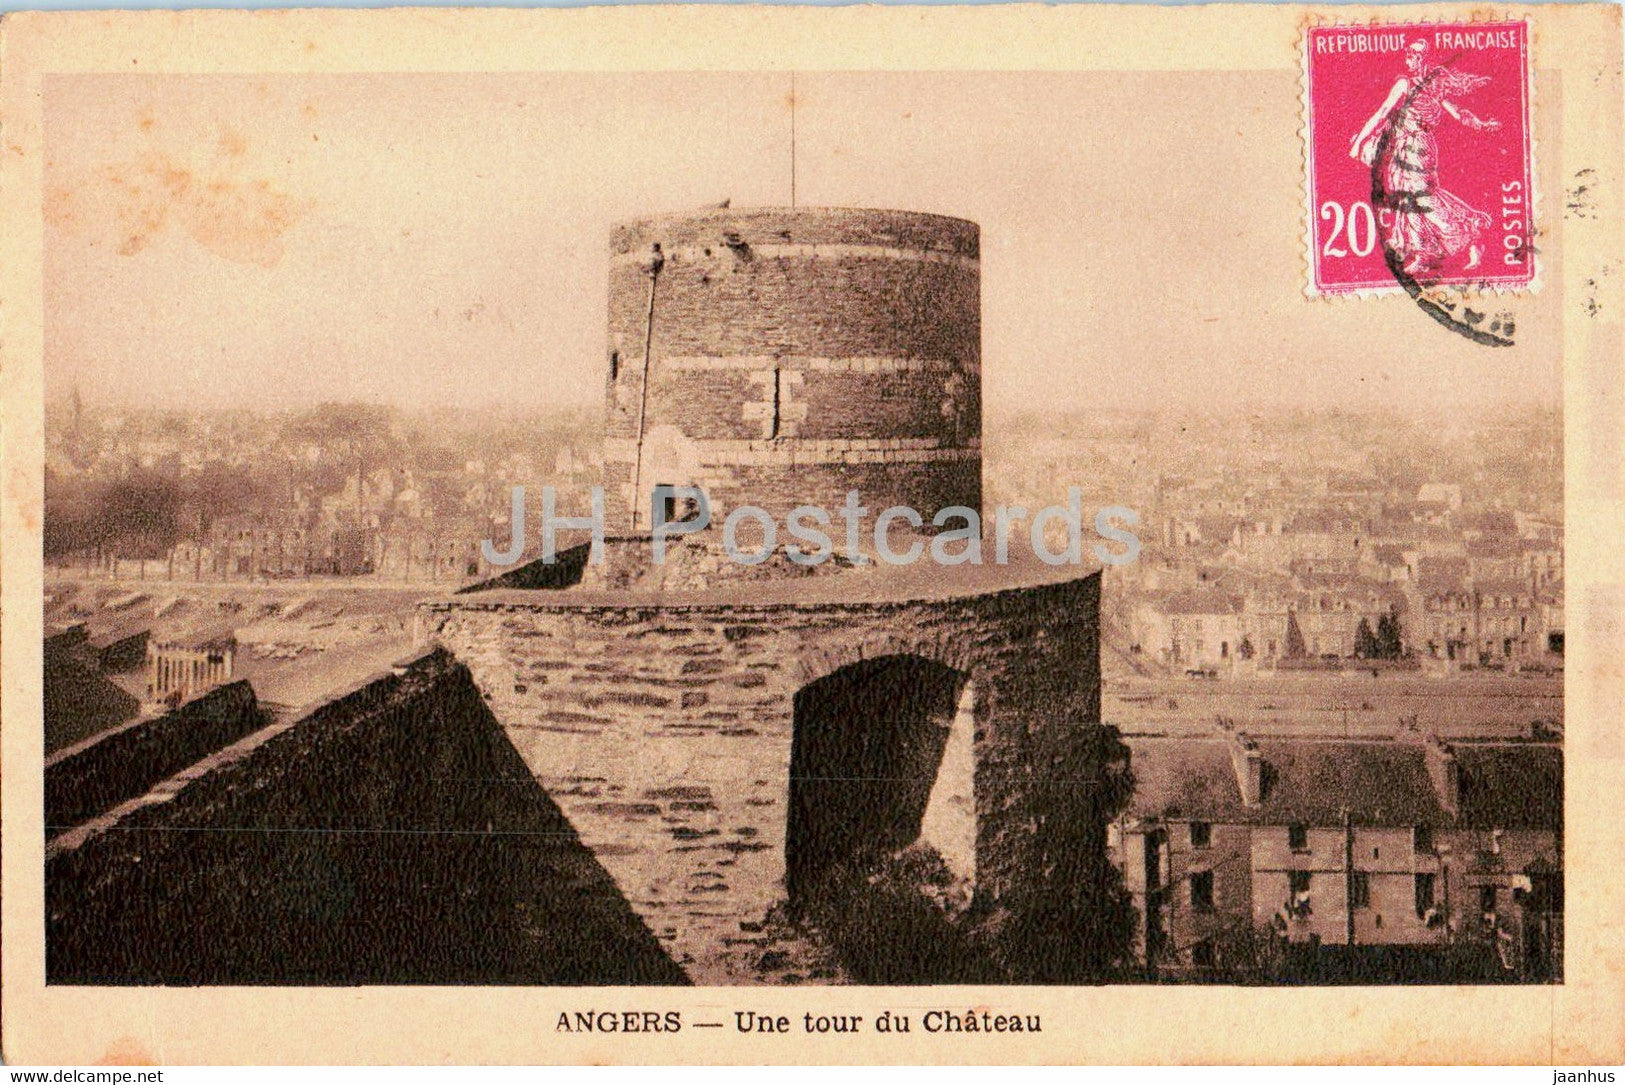 Angers - Une Tour du Chateau - old postcard - France - used - JH Postcards